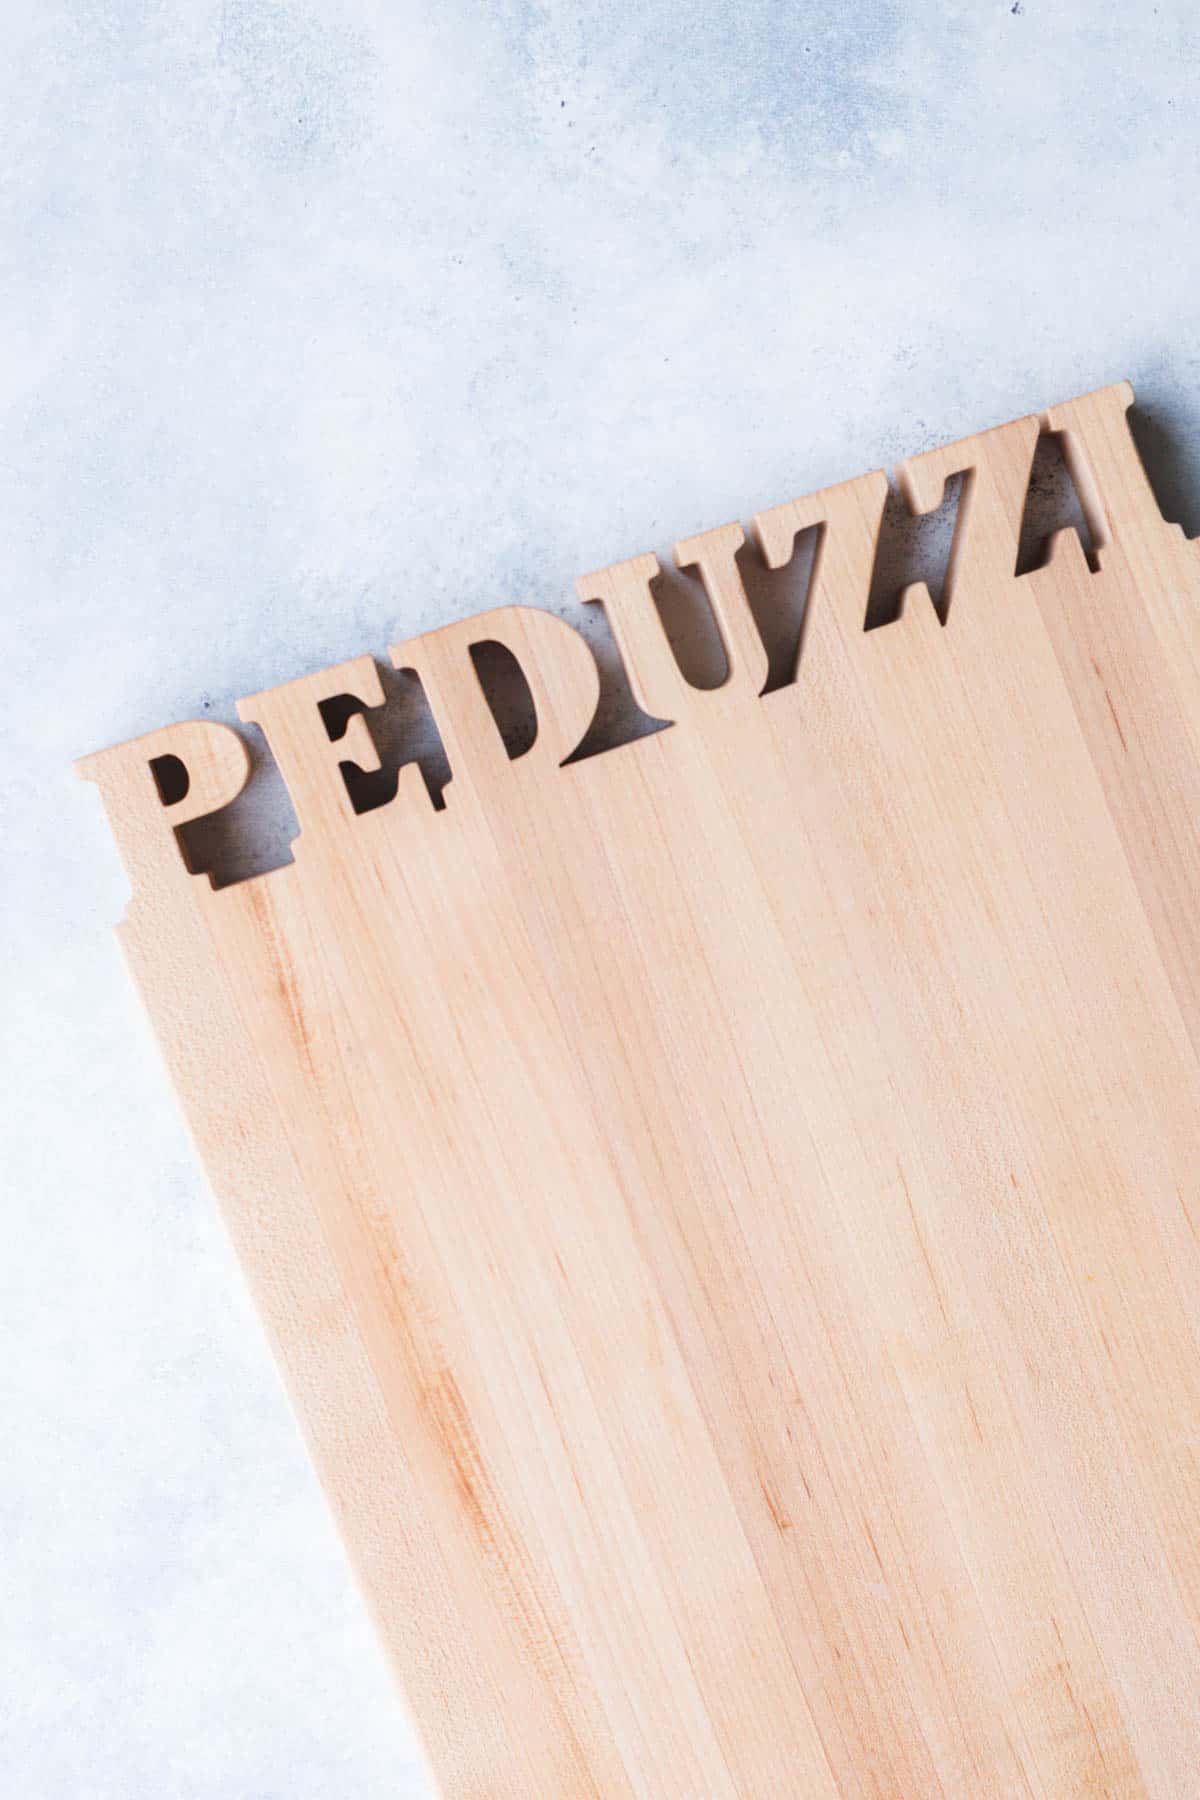 cutting board with the word "Peduzzi" lazer cut from it